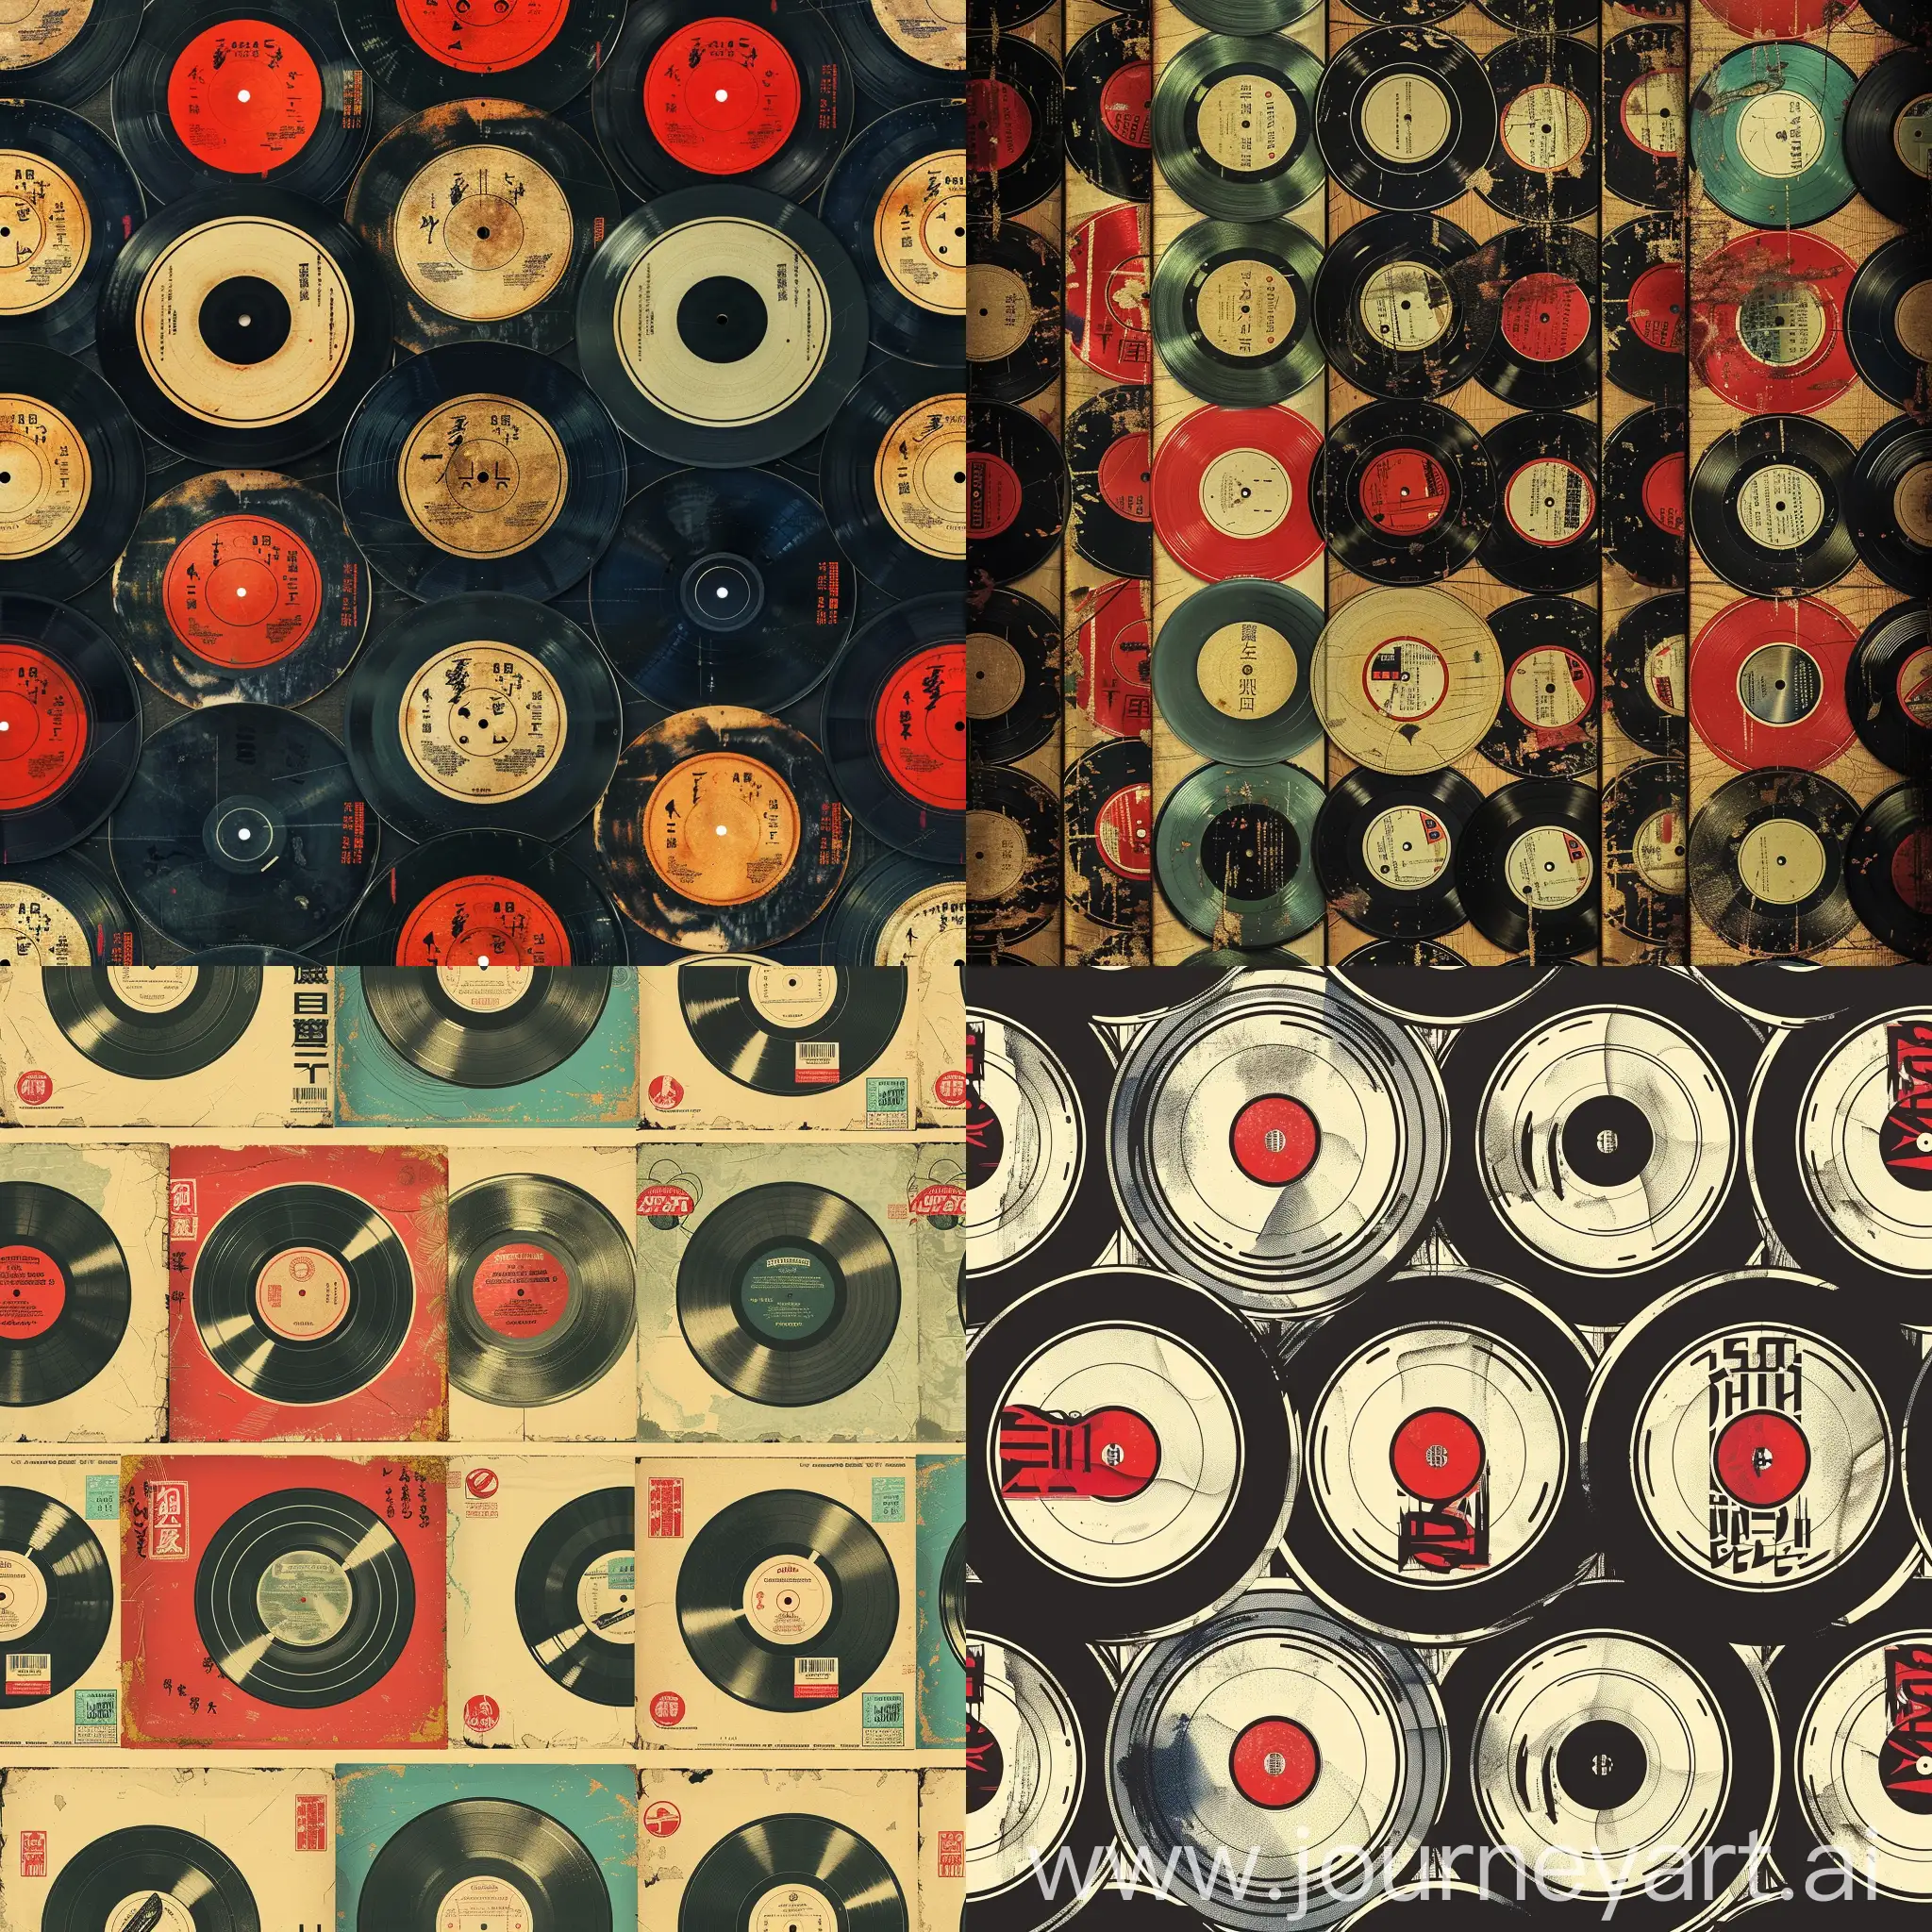 hiphop wallpaper in style of old Japanese records